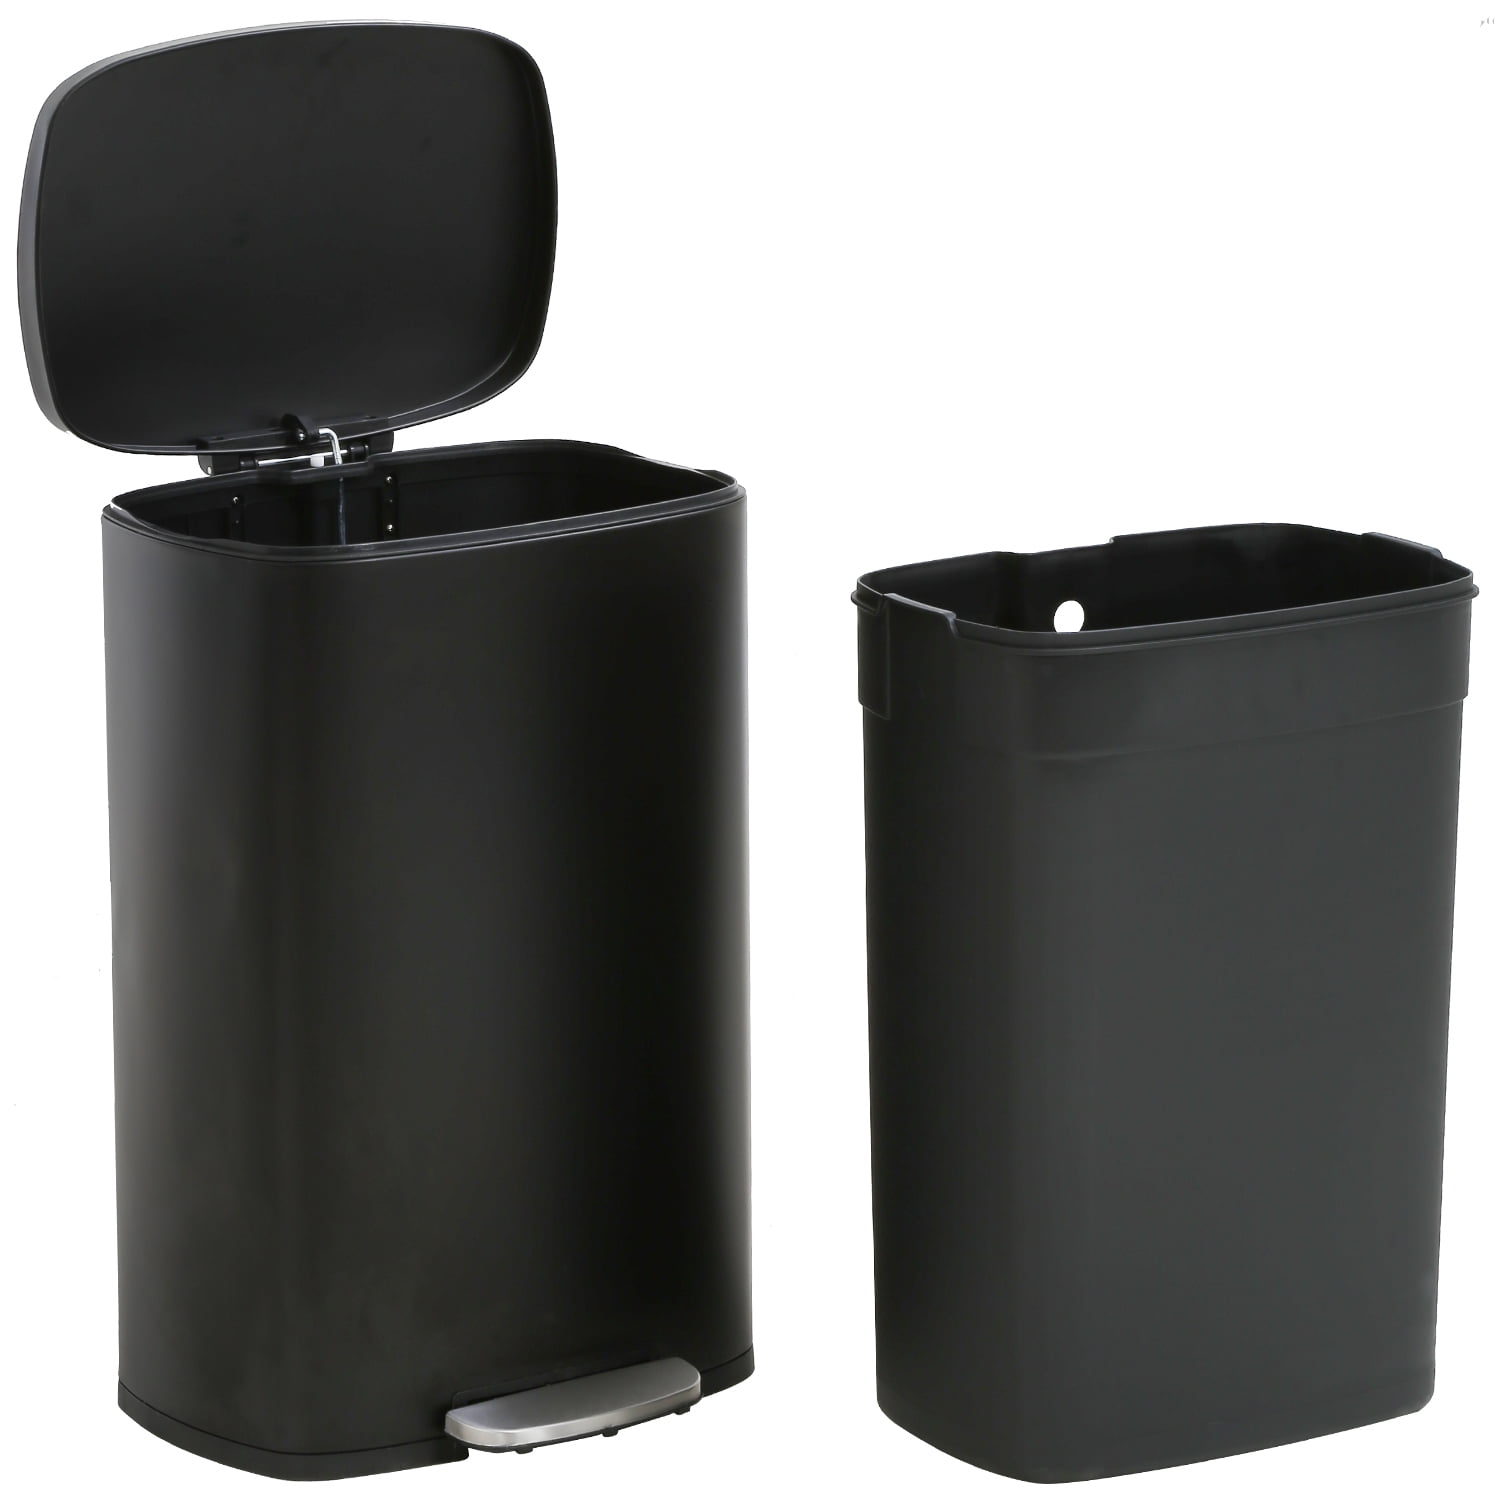 Stainless Steel Office Bathroom Rubbish Pedal Waste Bin 5 & 12 Litre Capacity 